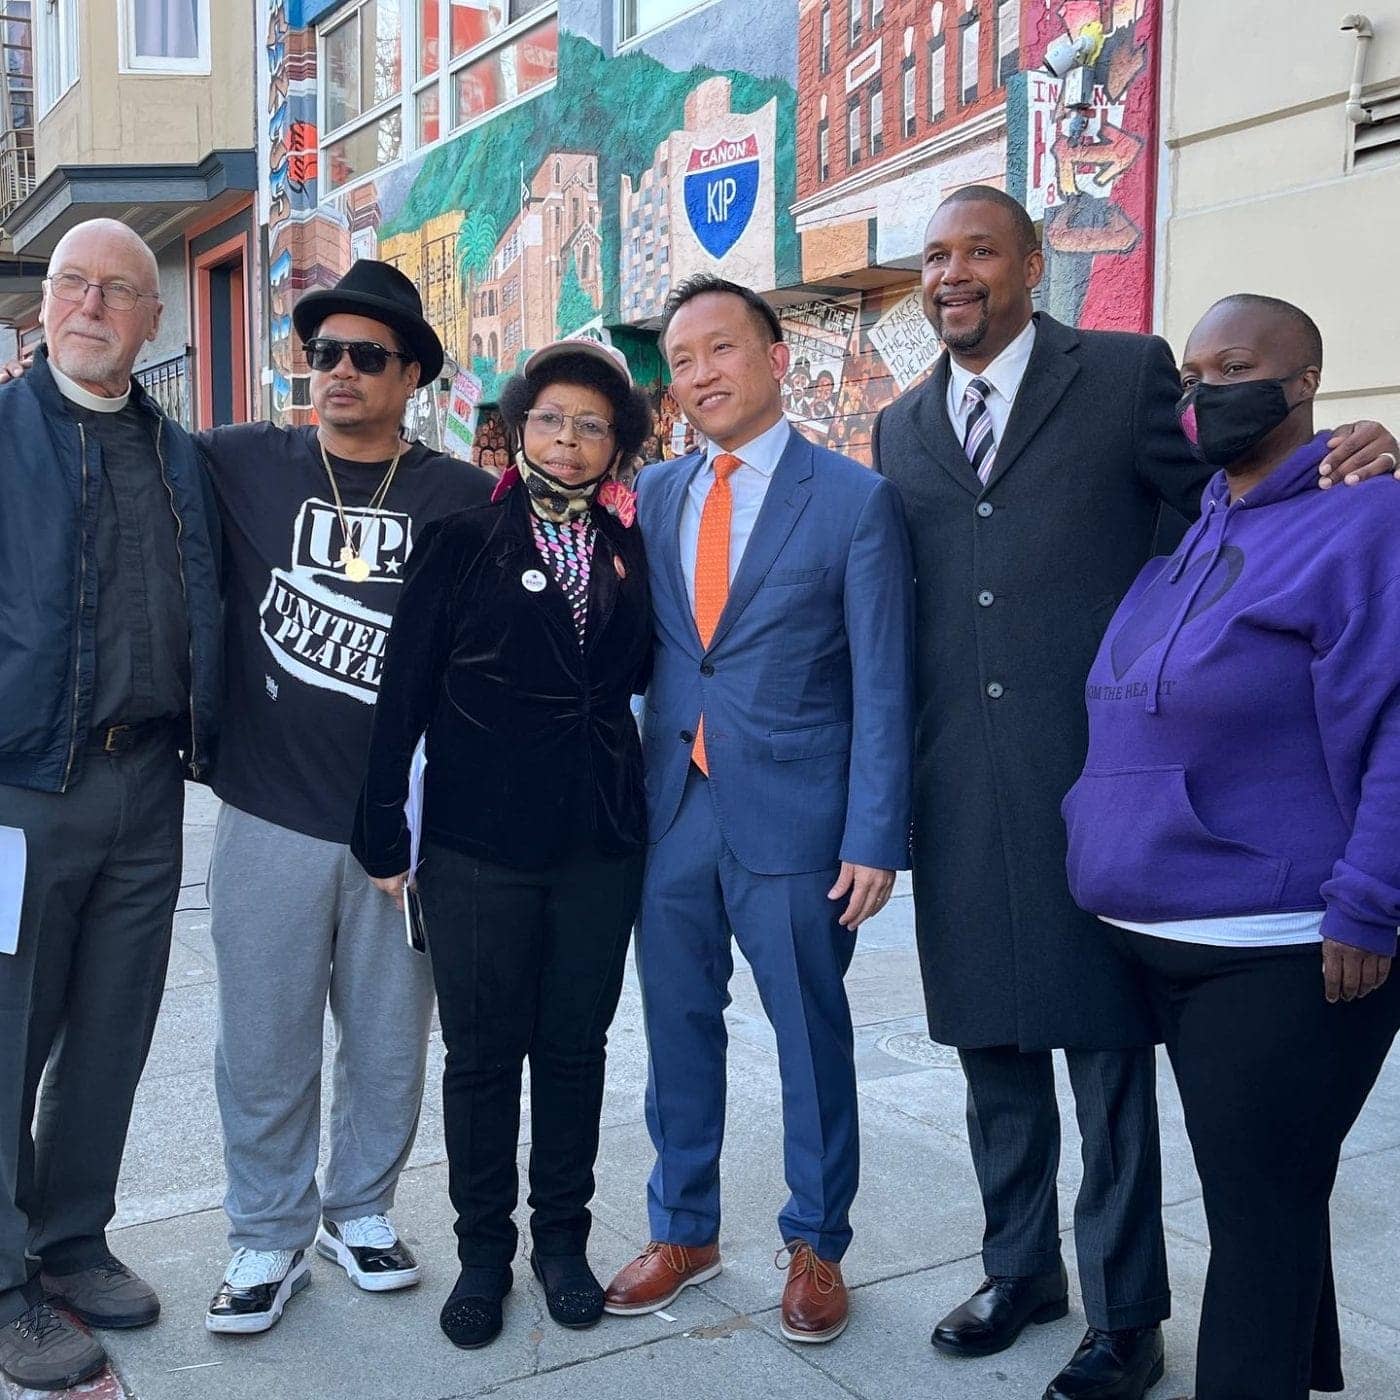 Group-photo-United-Playaz-David-Chiu-Shamann-Walton-at-United-Playaz-rally-040522-1400x1400, ‘We are in a battle for our city’: Community leaders gather to address weekend of violence in SF , Local News & Views News & Views 